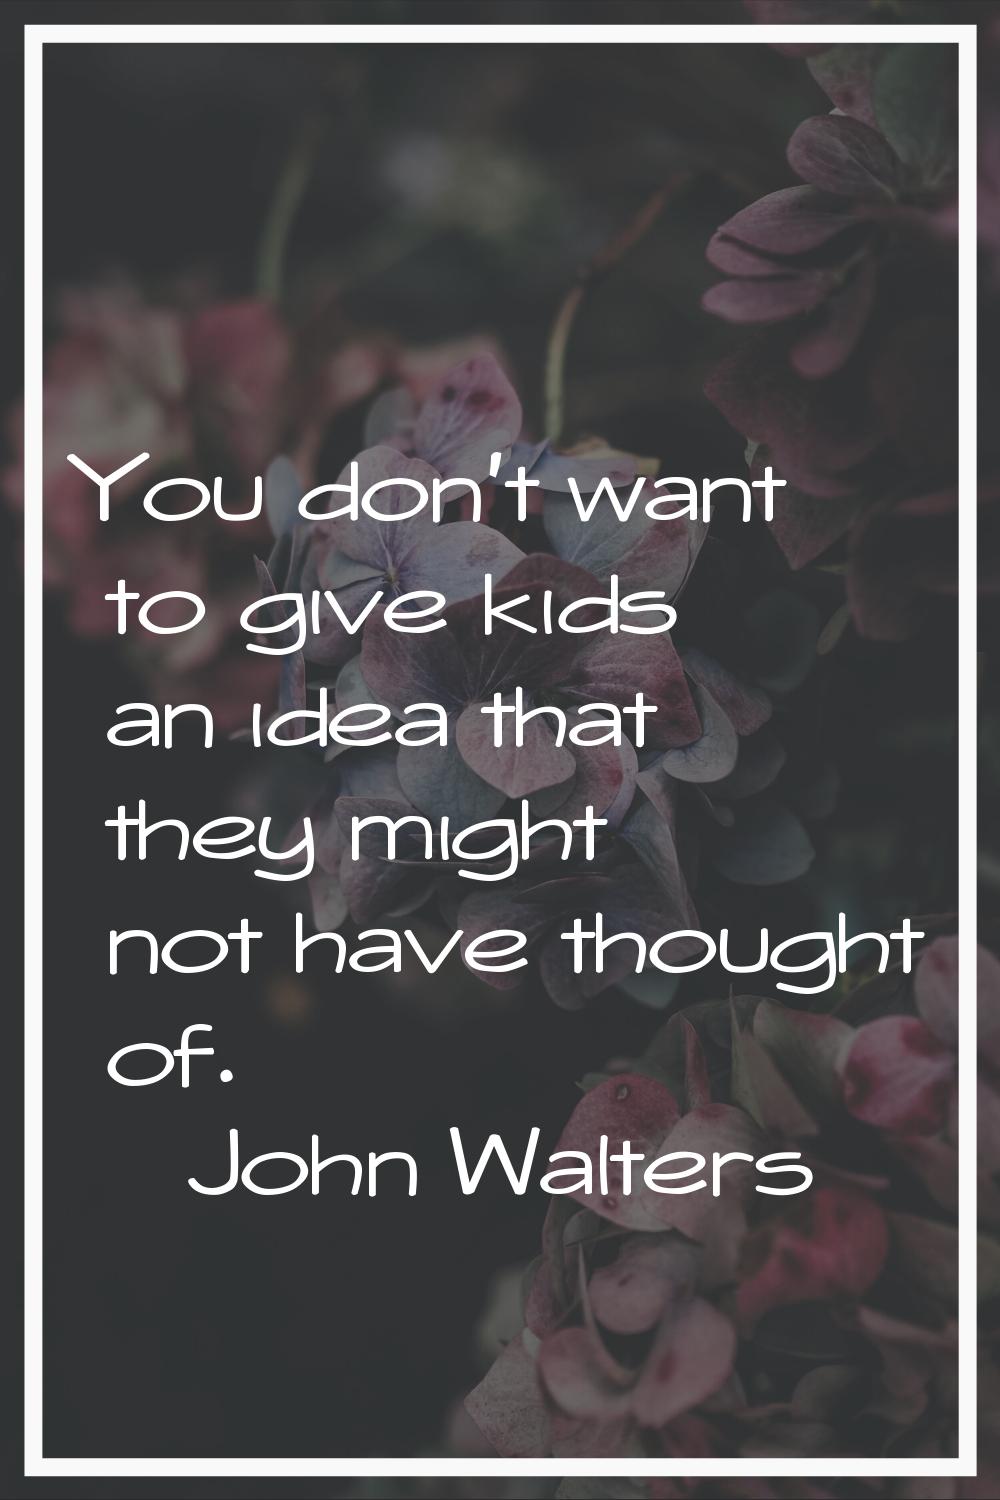 You don't want to give kids an idea that they might not have thought of.